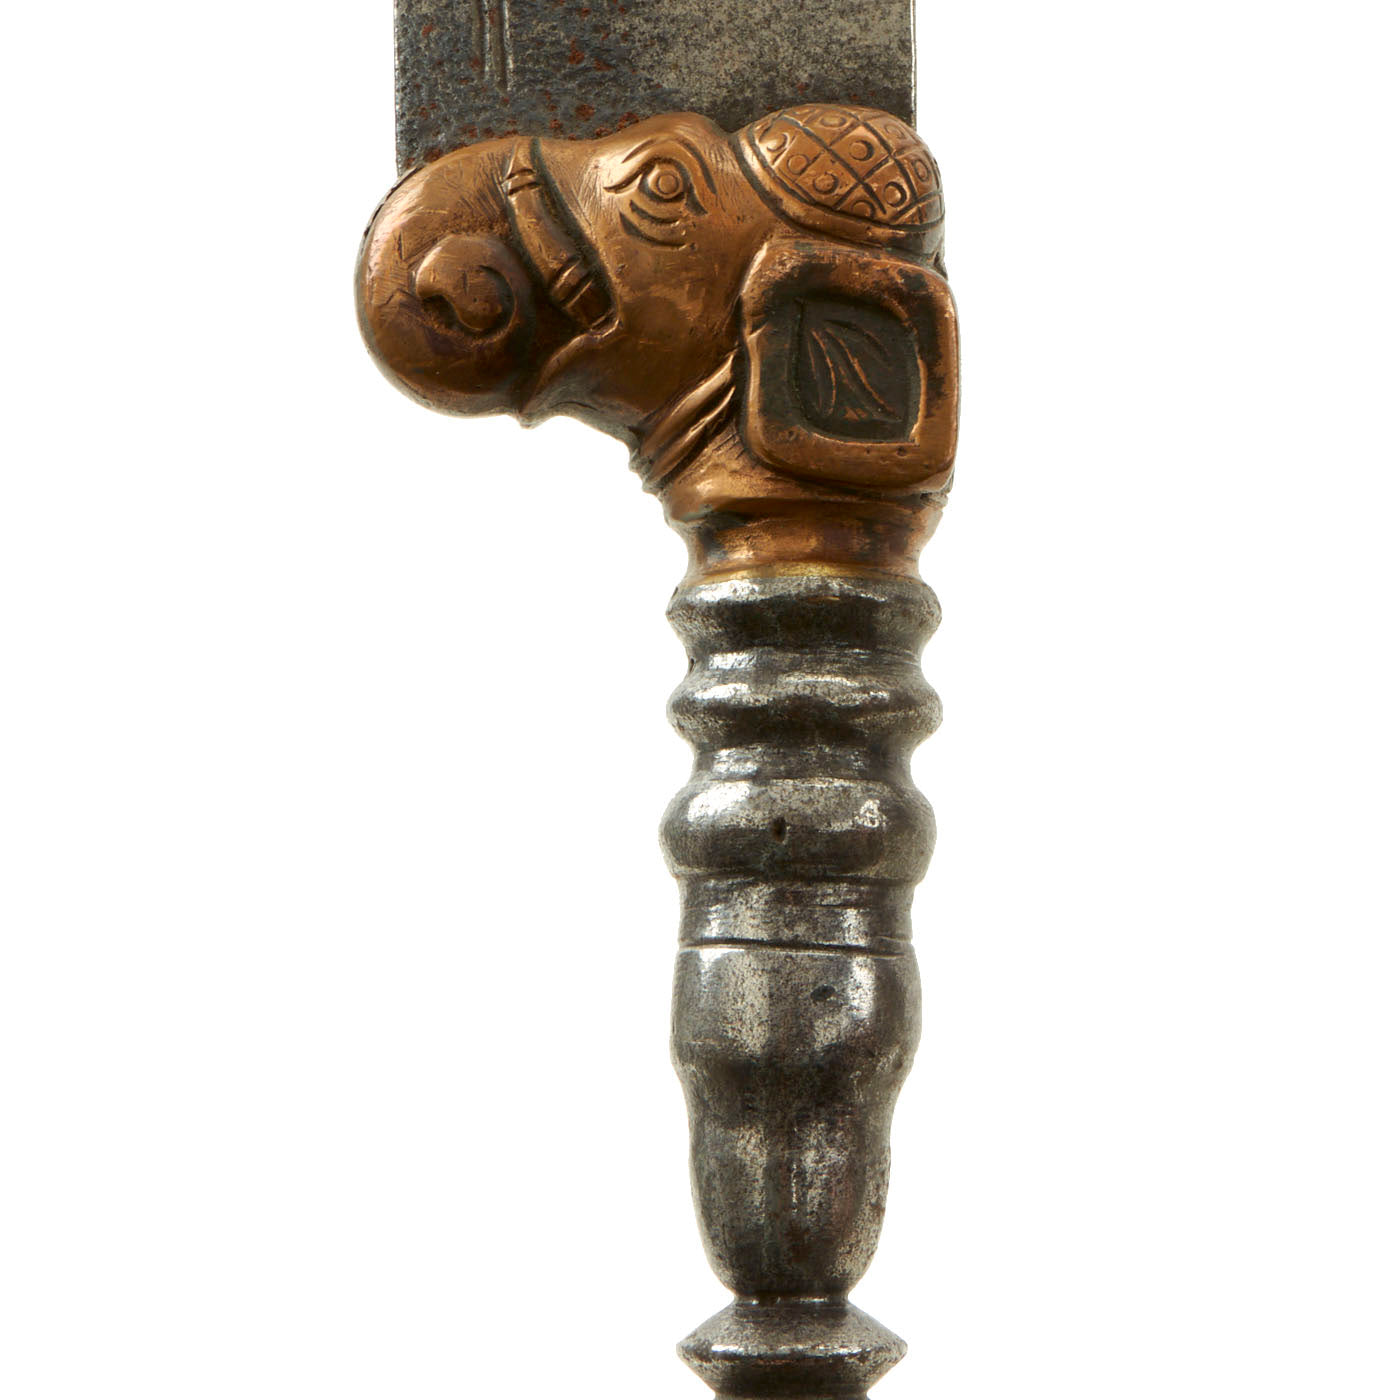 Bhuj, dagger or axe-knife with a hidden Gupti in the handle. Early 18th  Century, made of Damascus steel and blade are damascened in floral design  in gold. Salar Jung Museum, Hyderabad, India. [